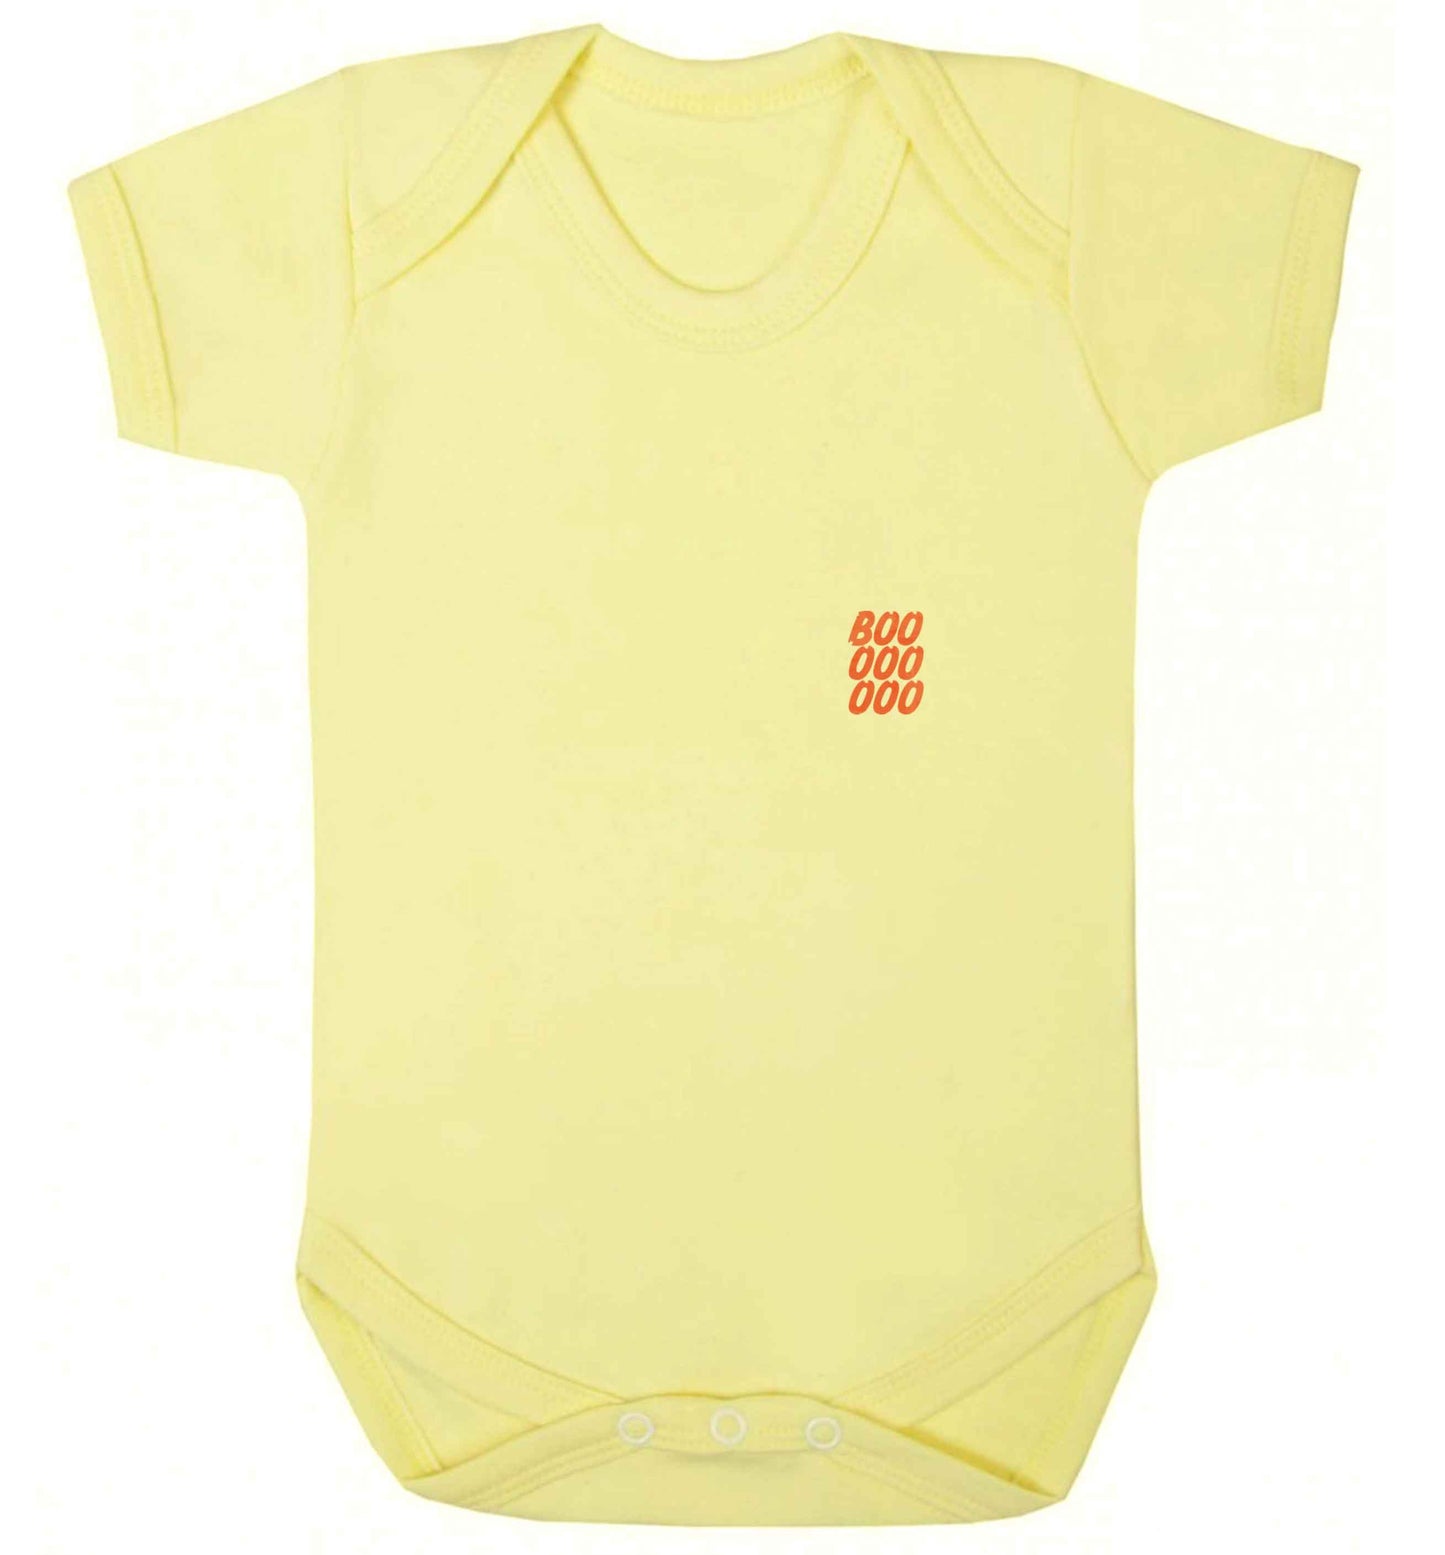 Boo pocket baby vest pale yellow 18-24 months